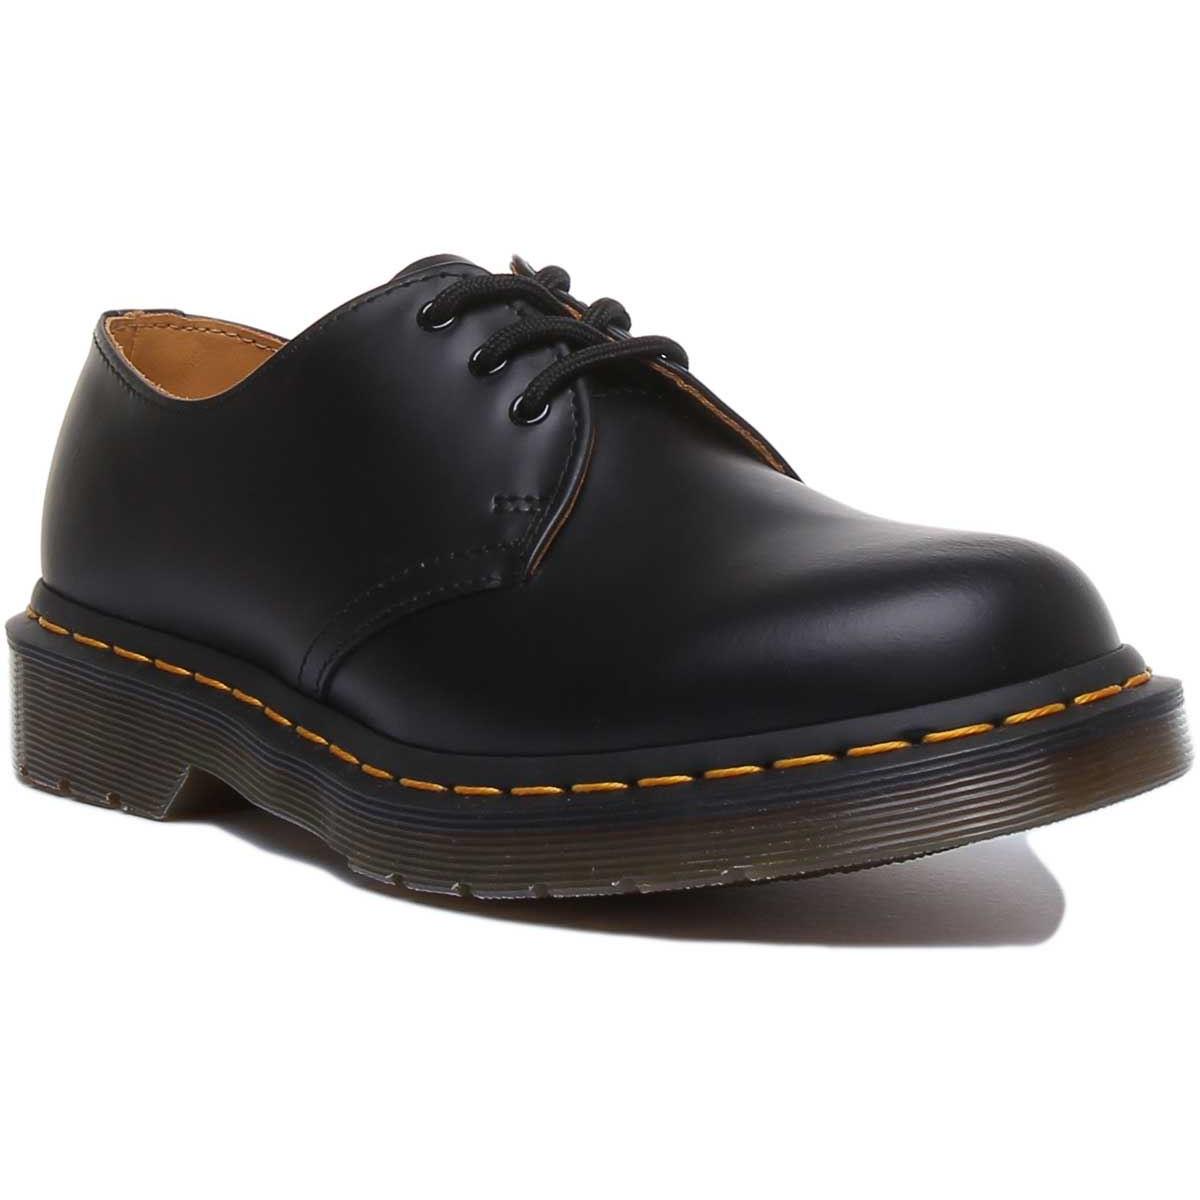 Dr Martens 1461 Unisex 3 Eye Lace Up Casual Shoes In Black Size US 4 - 14 BLACK